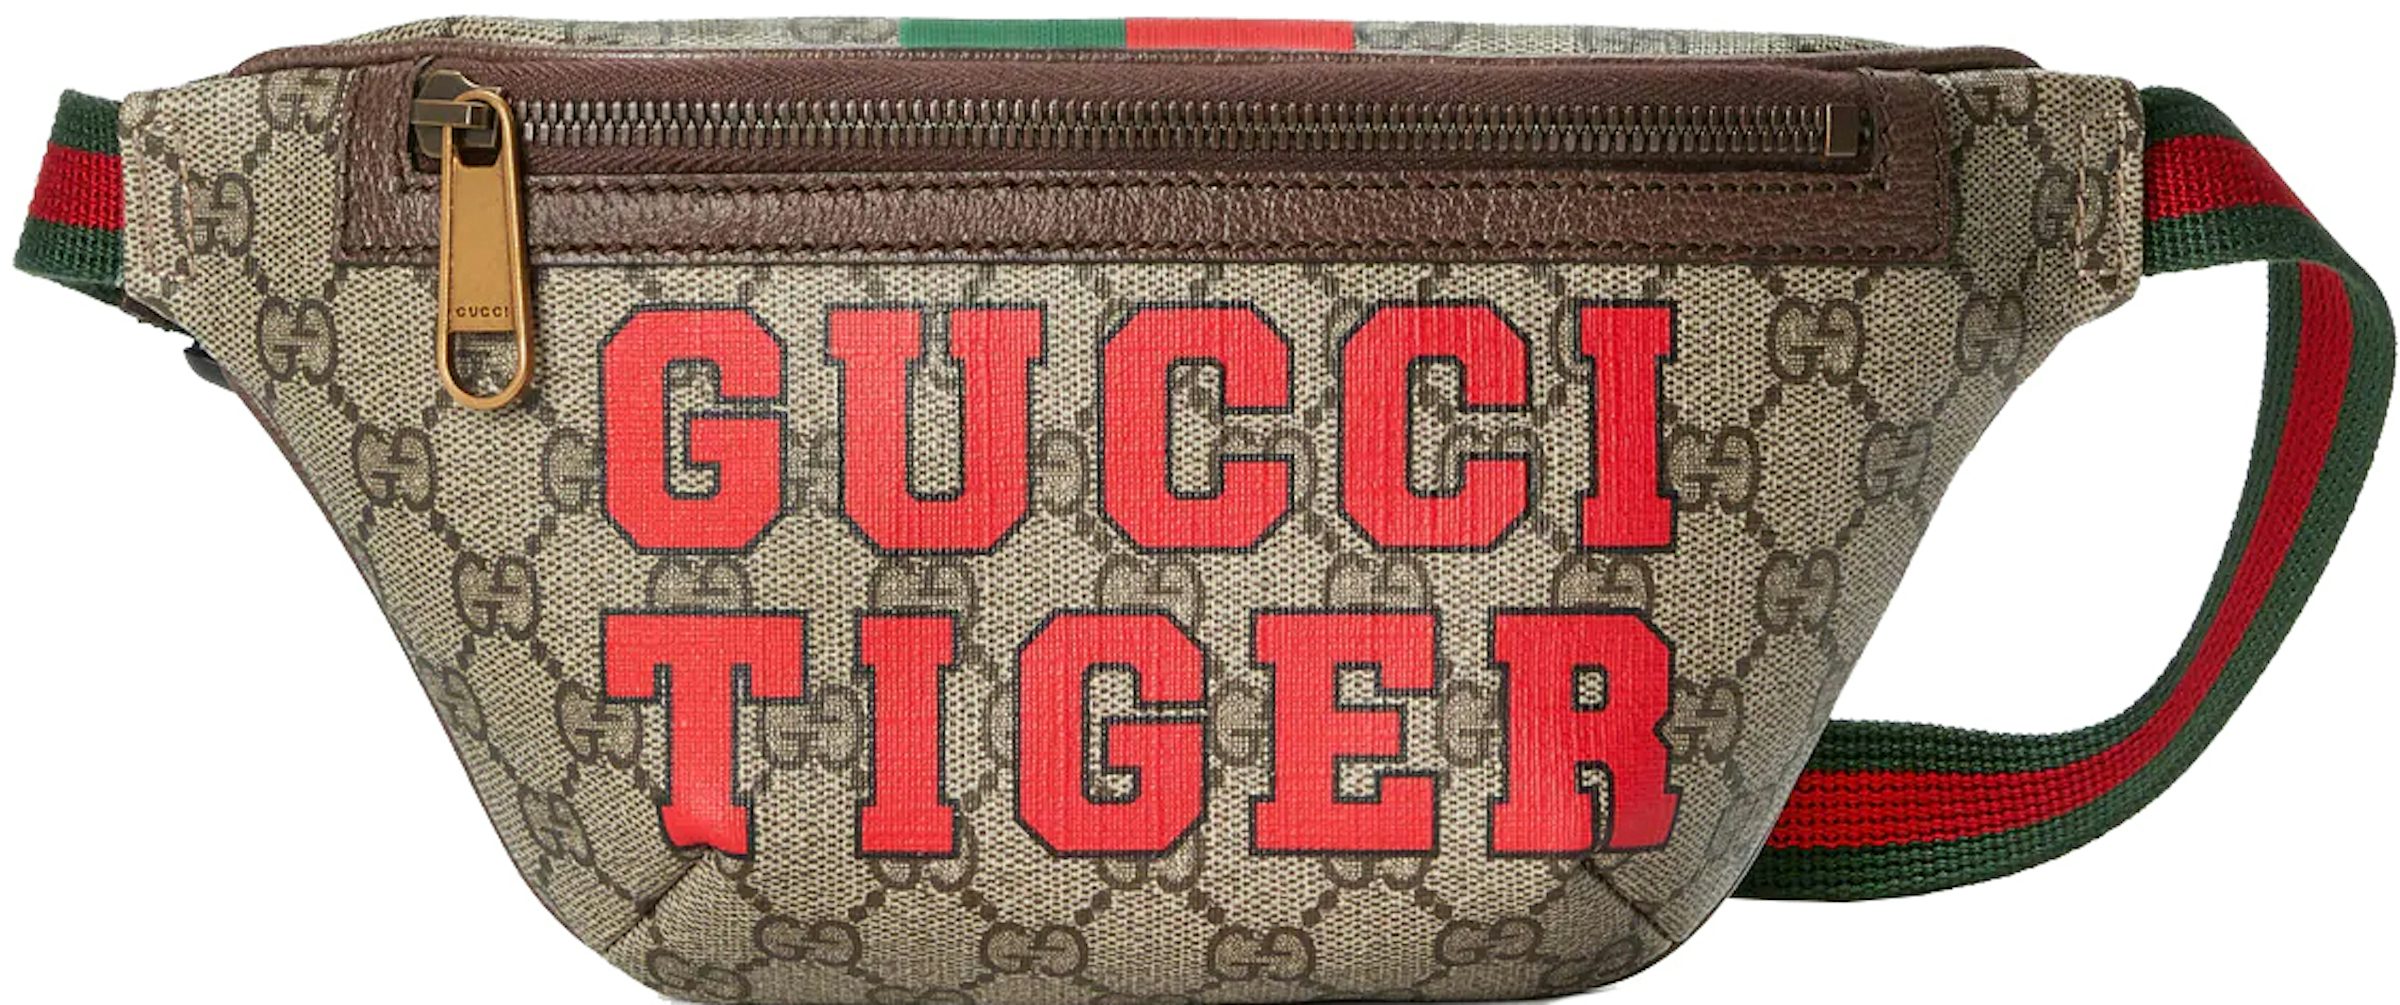 Gucci Men's Small Retro Leather Fanny Pack Belt Bag In Red